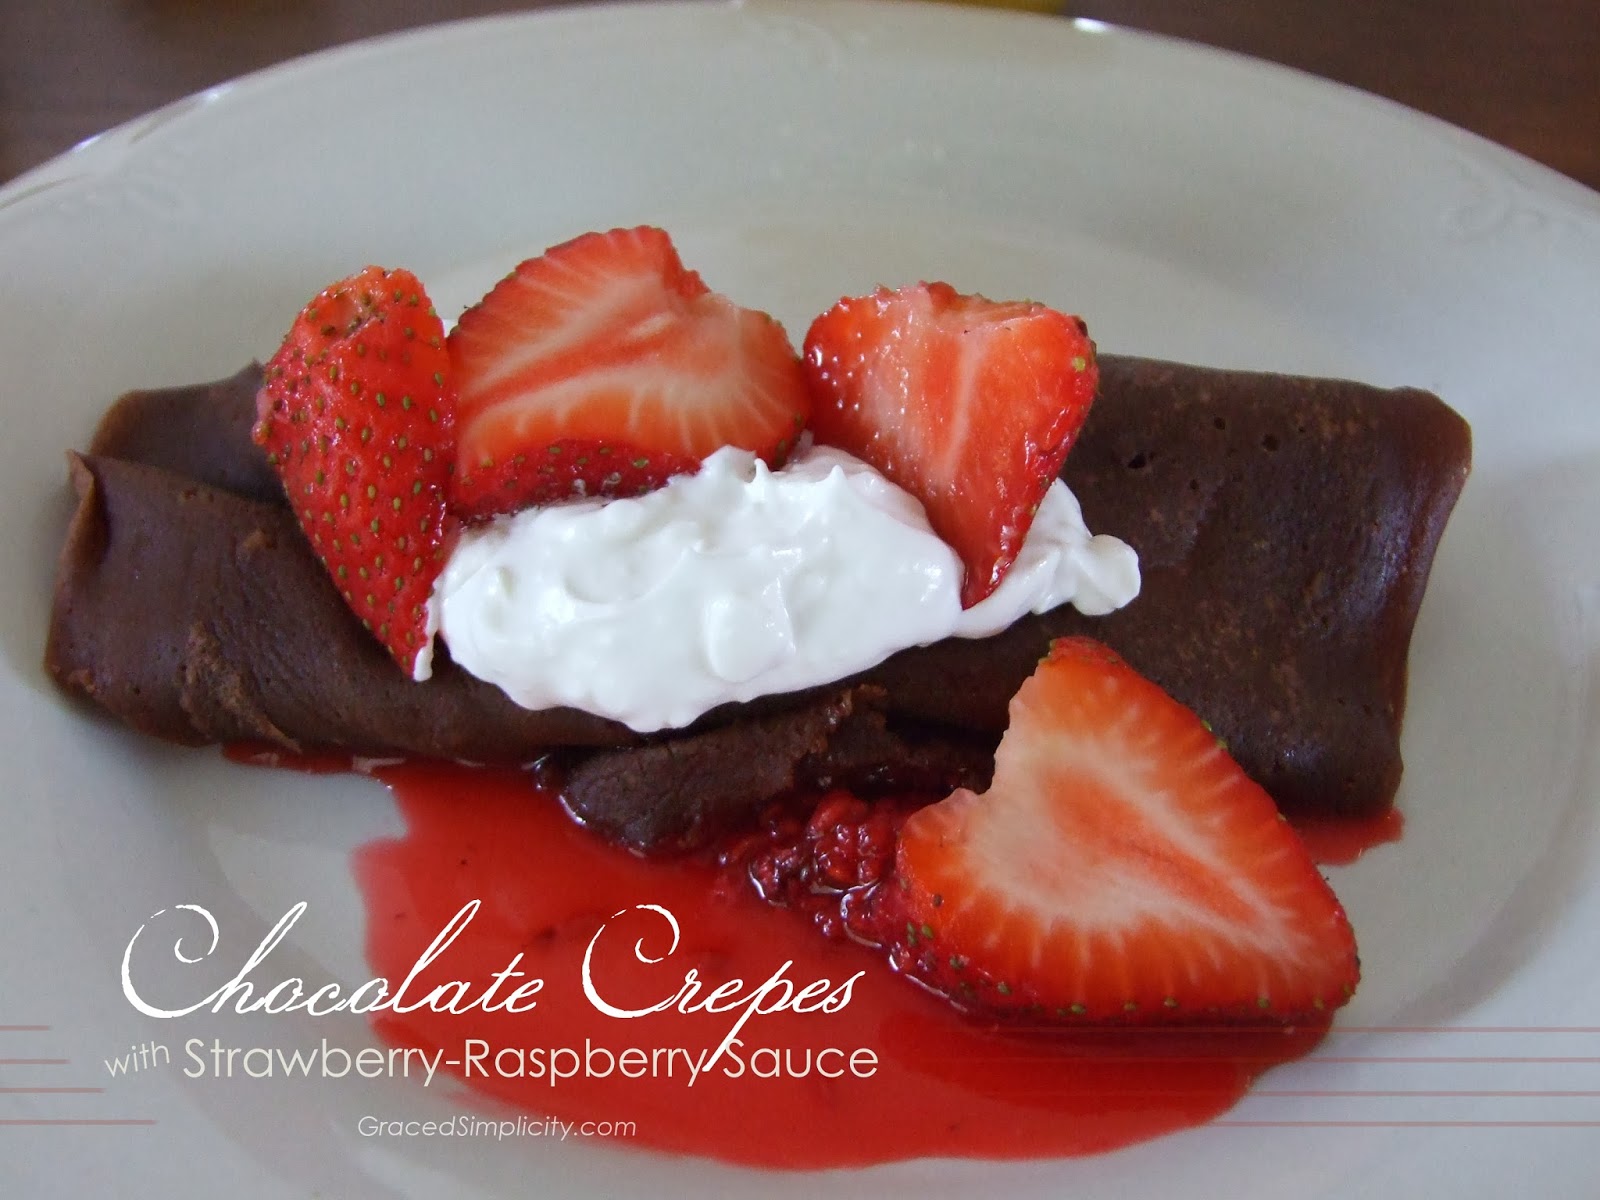 http://www.gracedsimplicity.com/2014/02/chocolate-crepes-with-strawberry.html